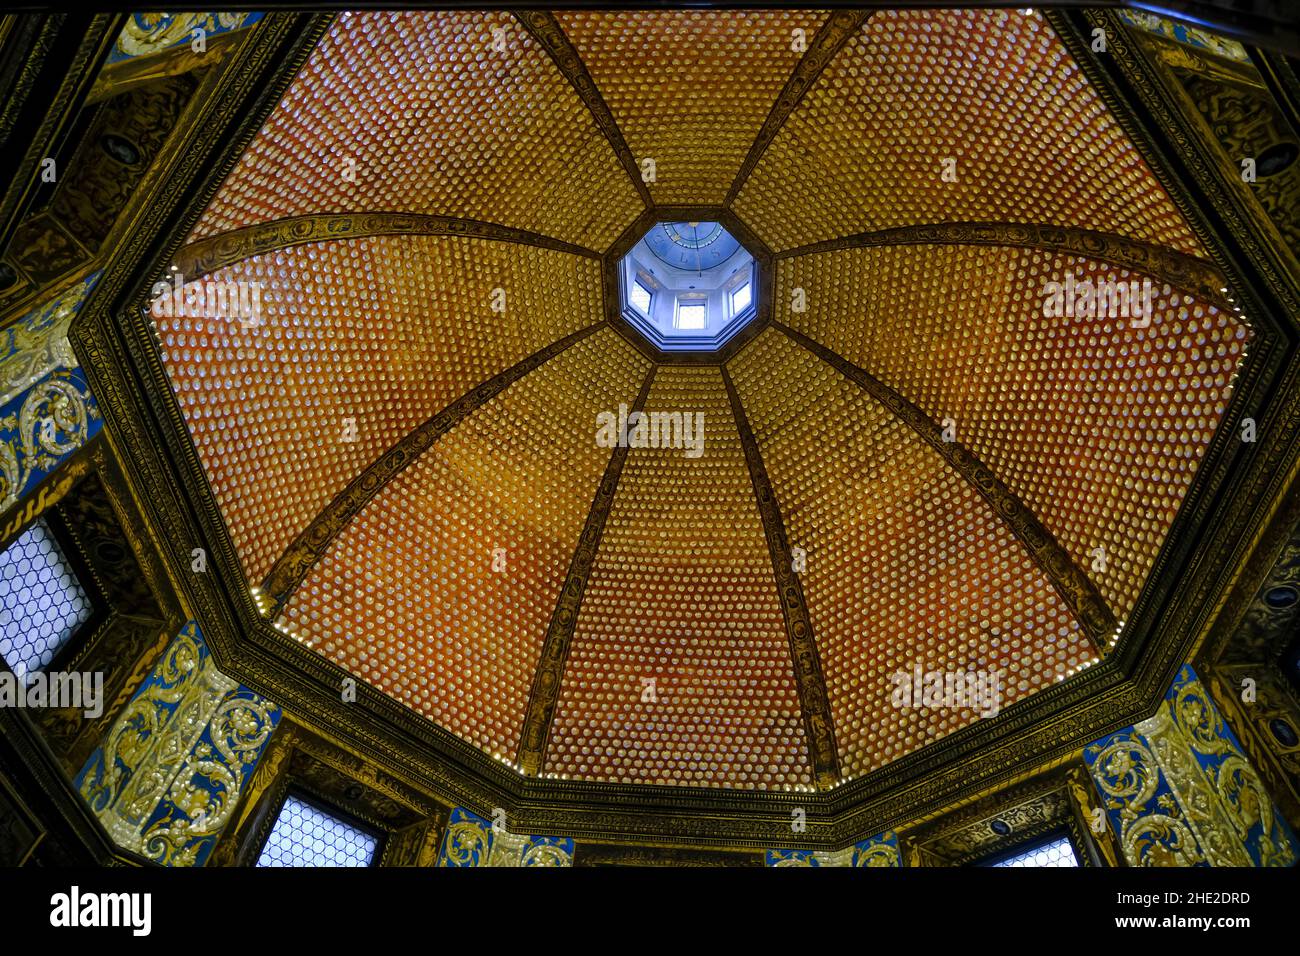 December 2021 Florence, Italy:  La Tribuna ceiling in the Uffizi museum. Dome-ceiling Stock Photo